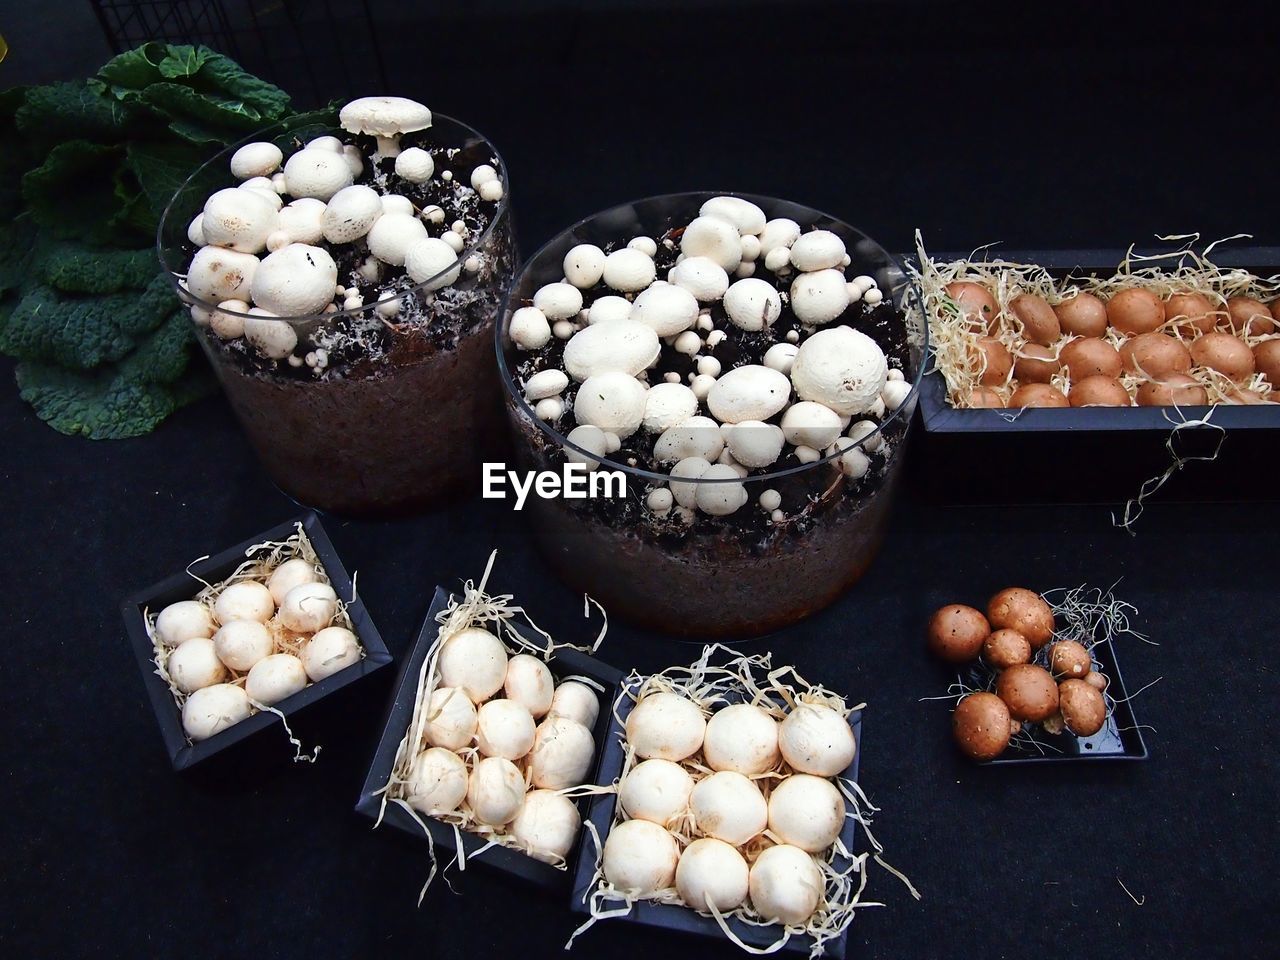 High angle view of mushrooms in container